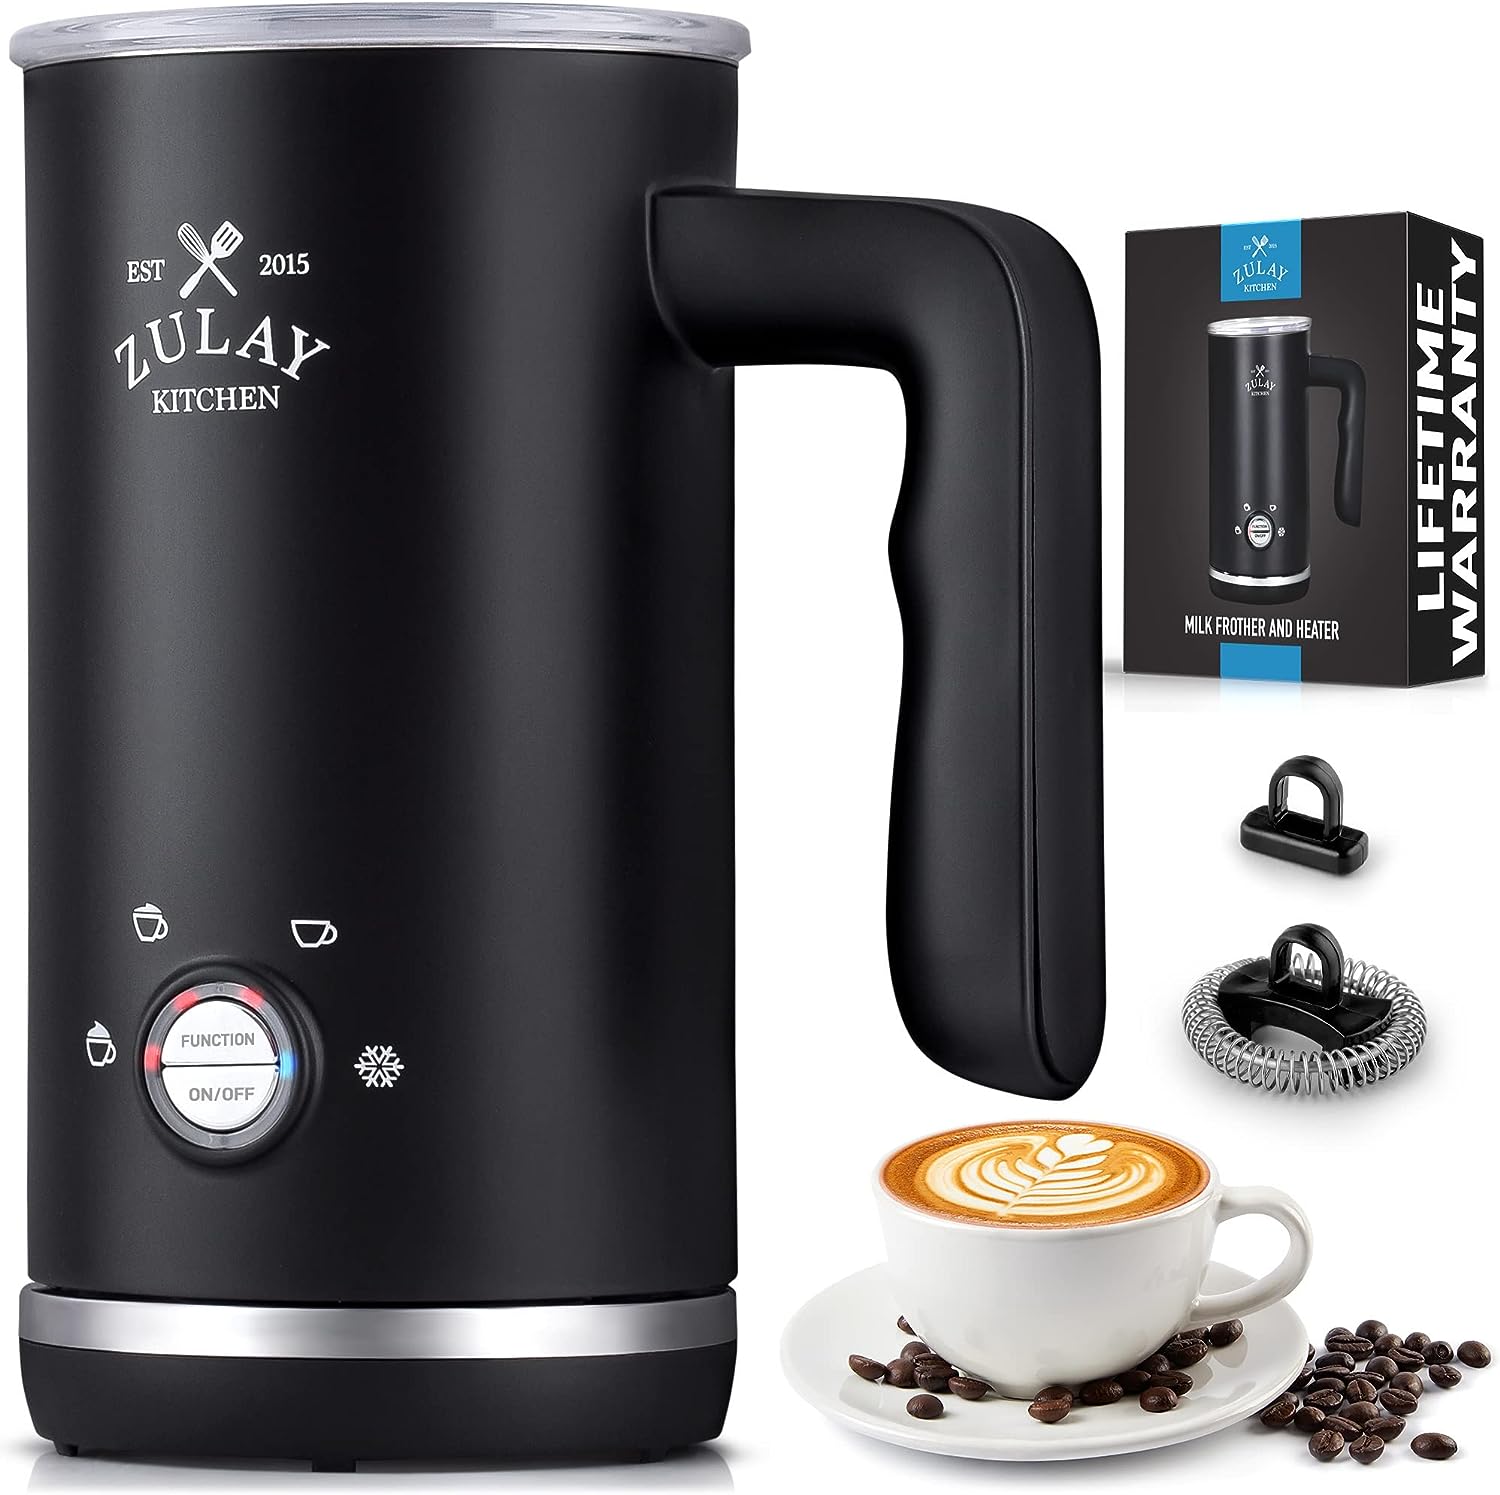 Milk Steamer and Frother by Zulay Kitchen